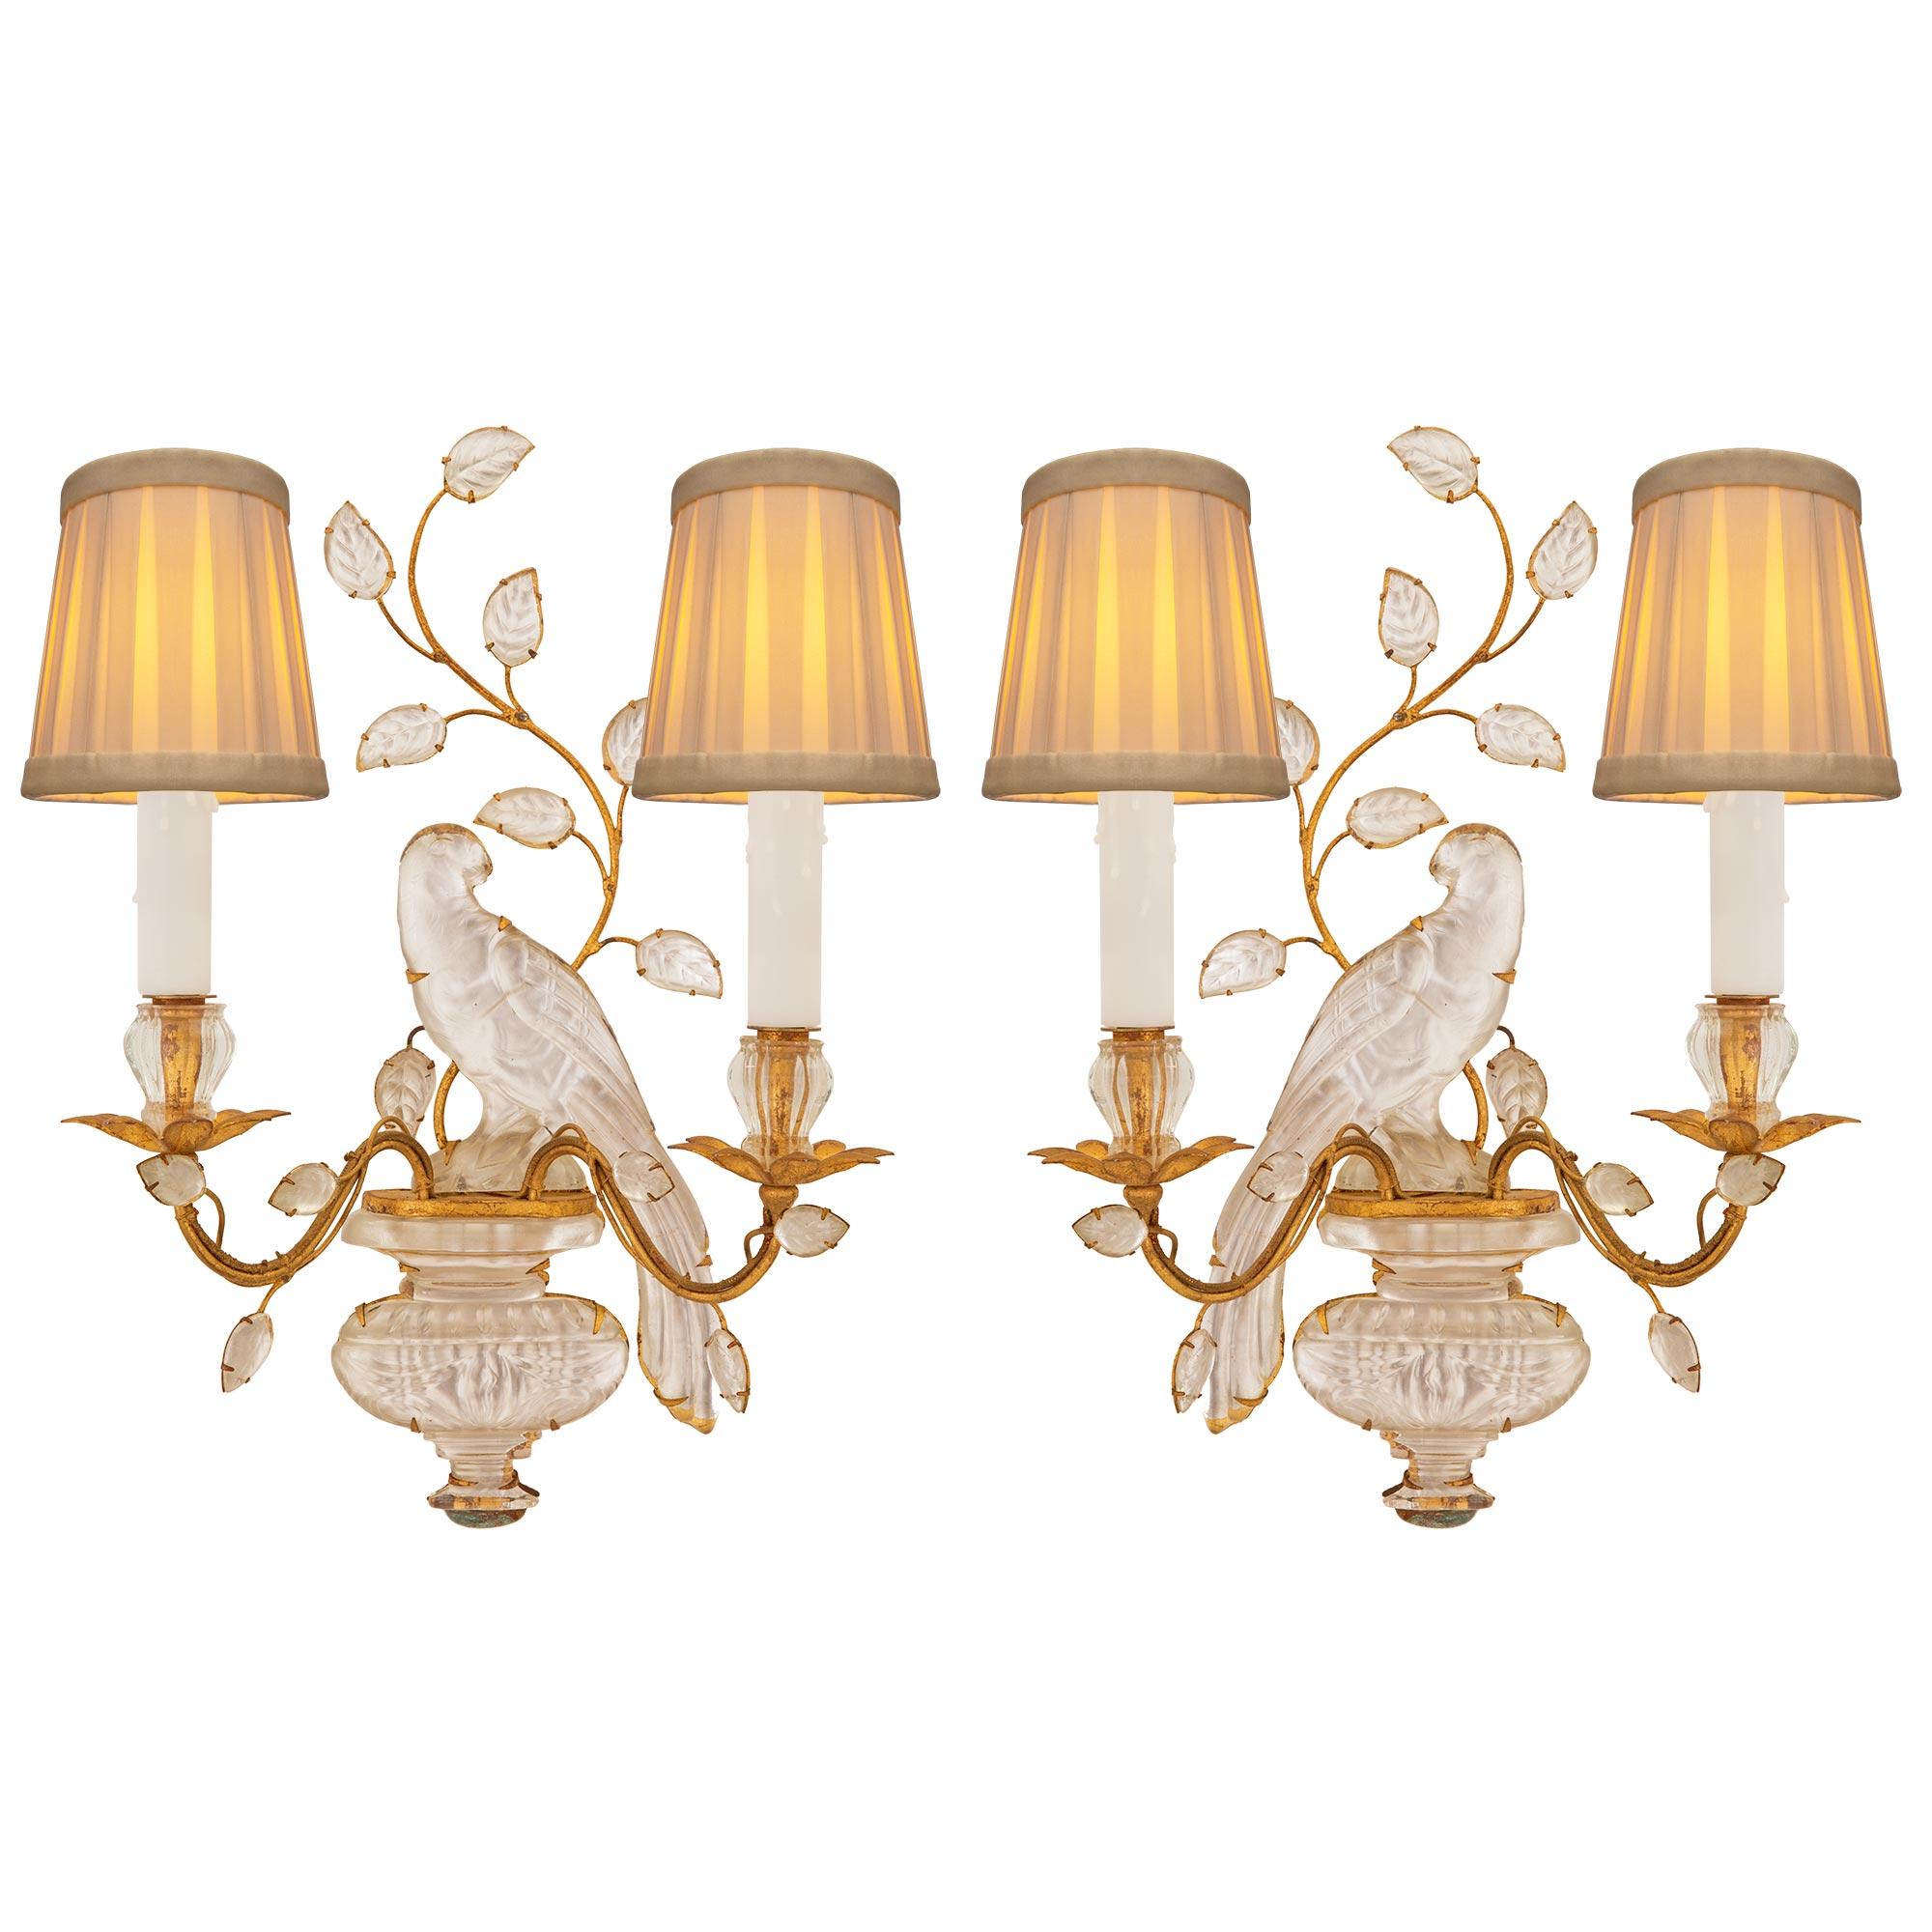 A beautiful true pair of French turn of the century Louis XVI st. gilt metal, silvered leaf, and crystal sconces attributed to Maison Bagues. Each two arm sconce displays a beautiful bottom crystal urn with a lovely mottled design set on a silvered